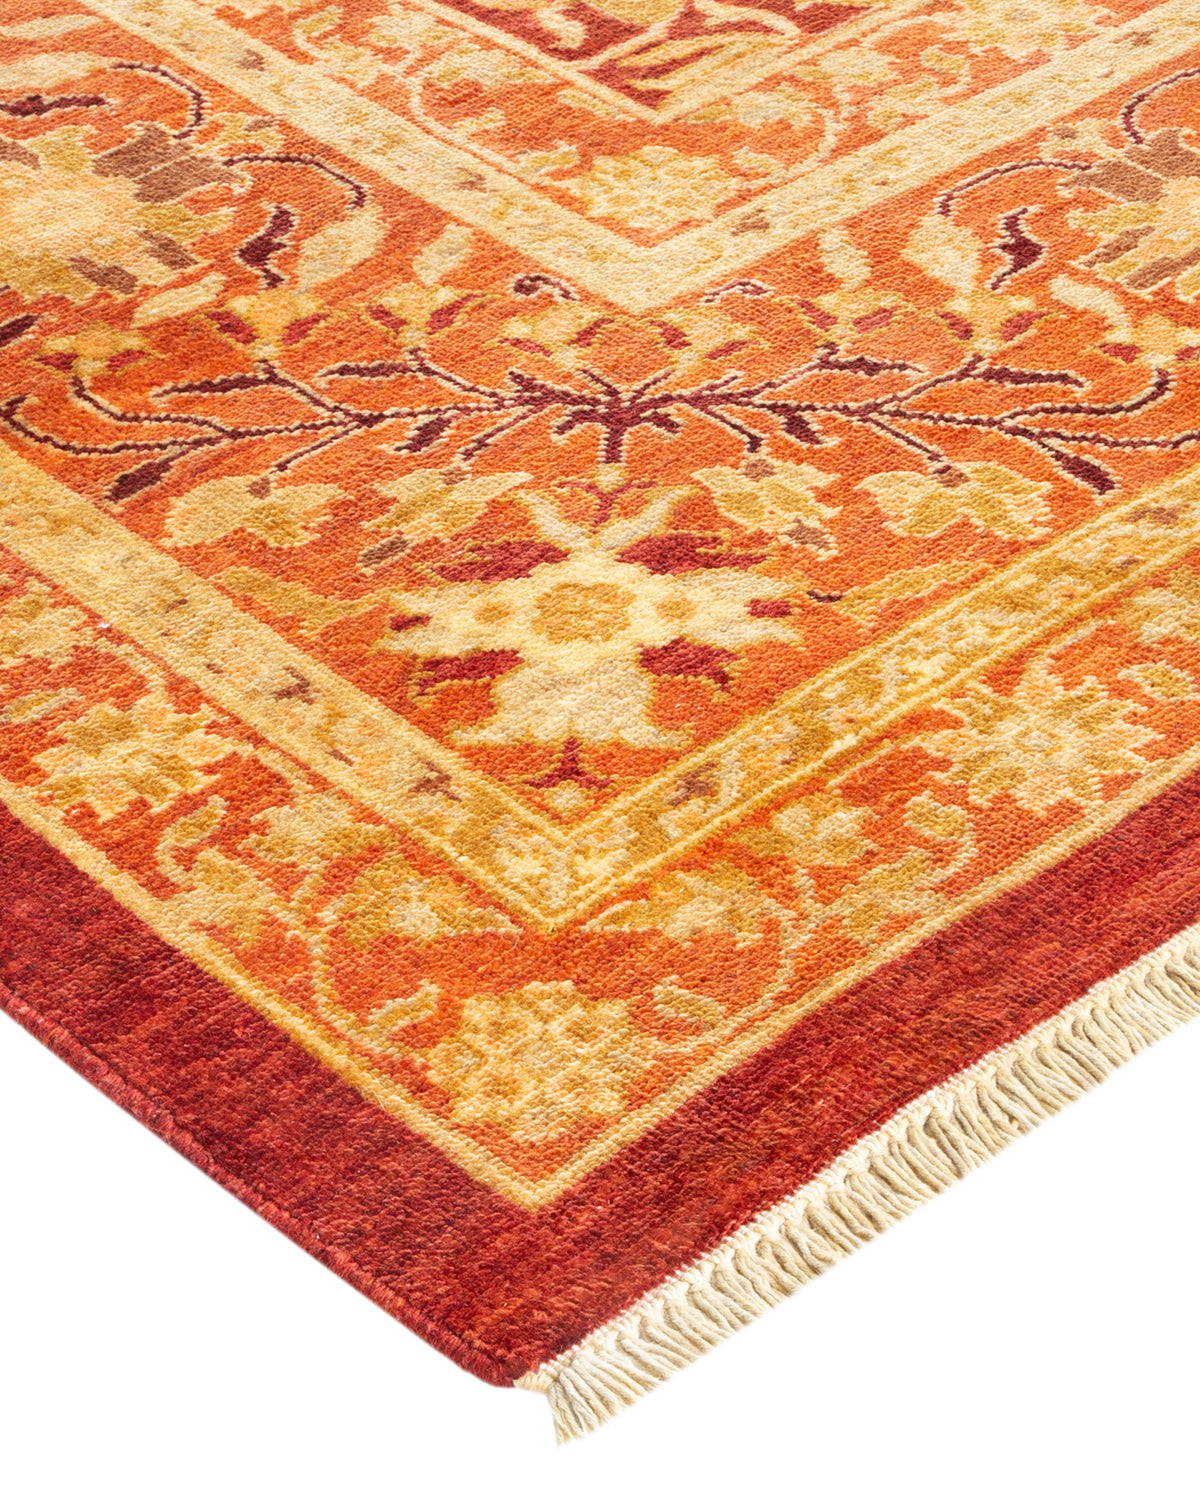 Eclectic, One-of-a-Kind Hand-Knotted Area Rug  - Red,  8' 3" x 10' 1"